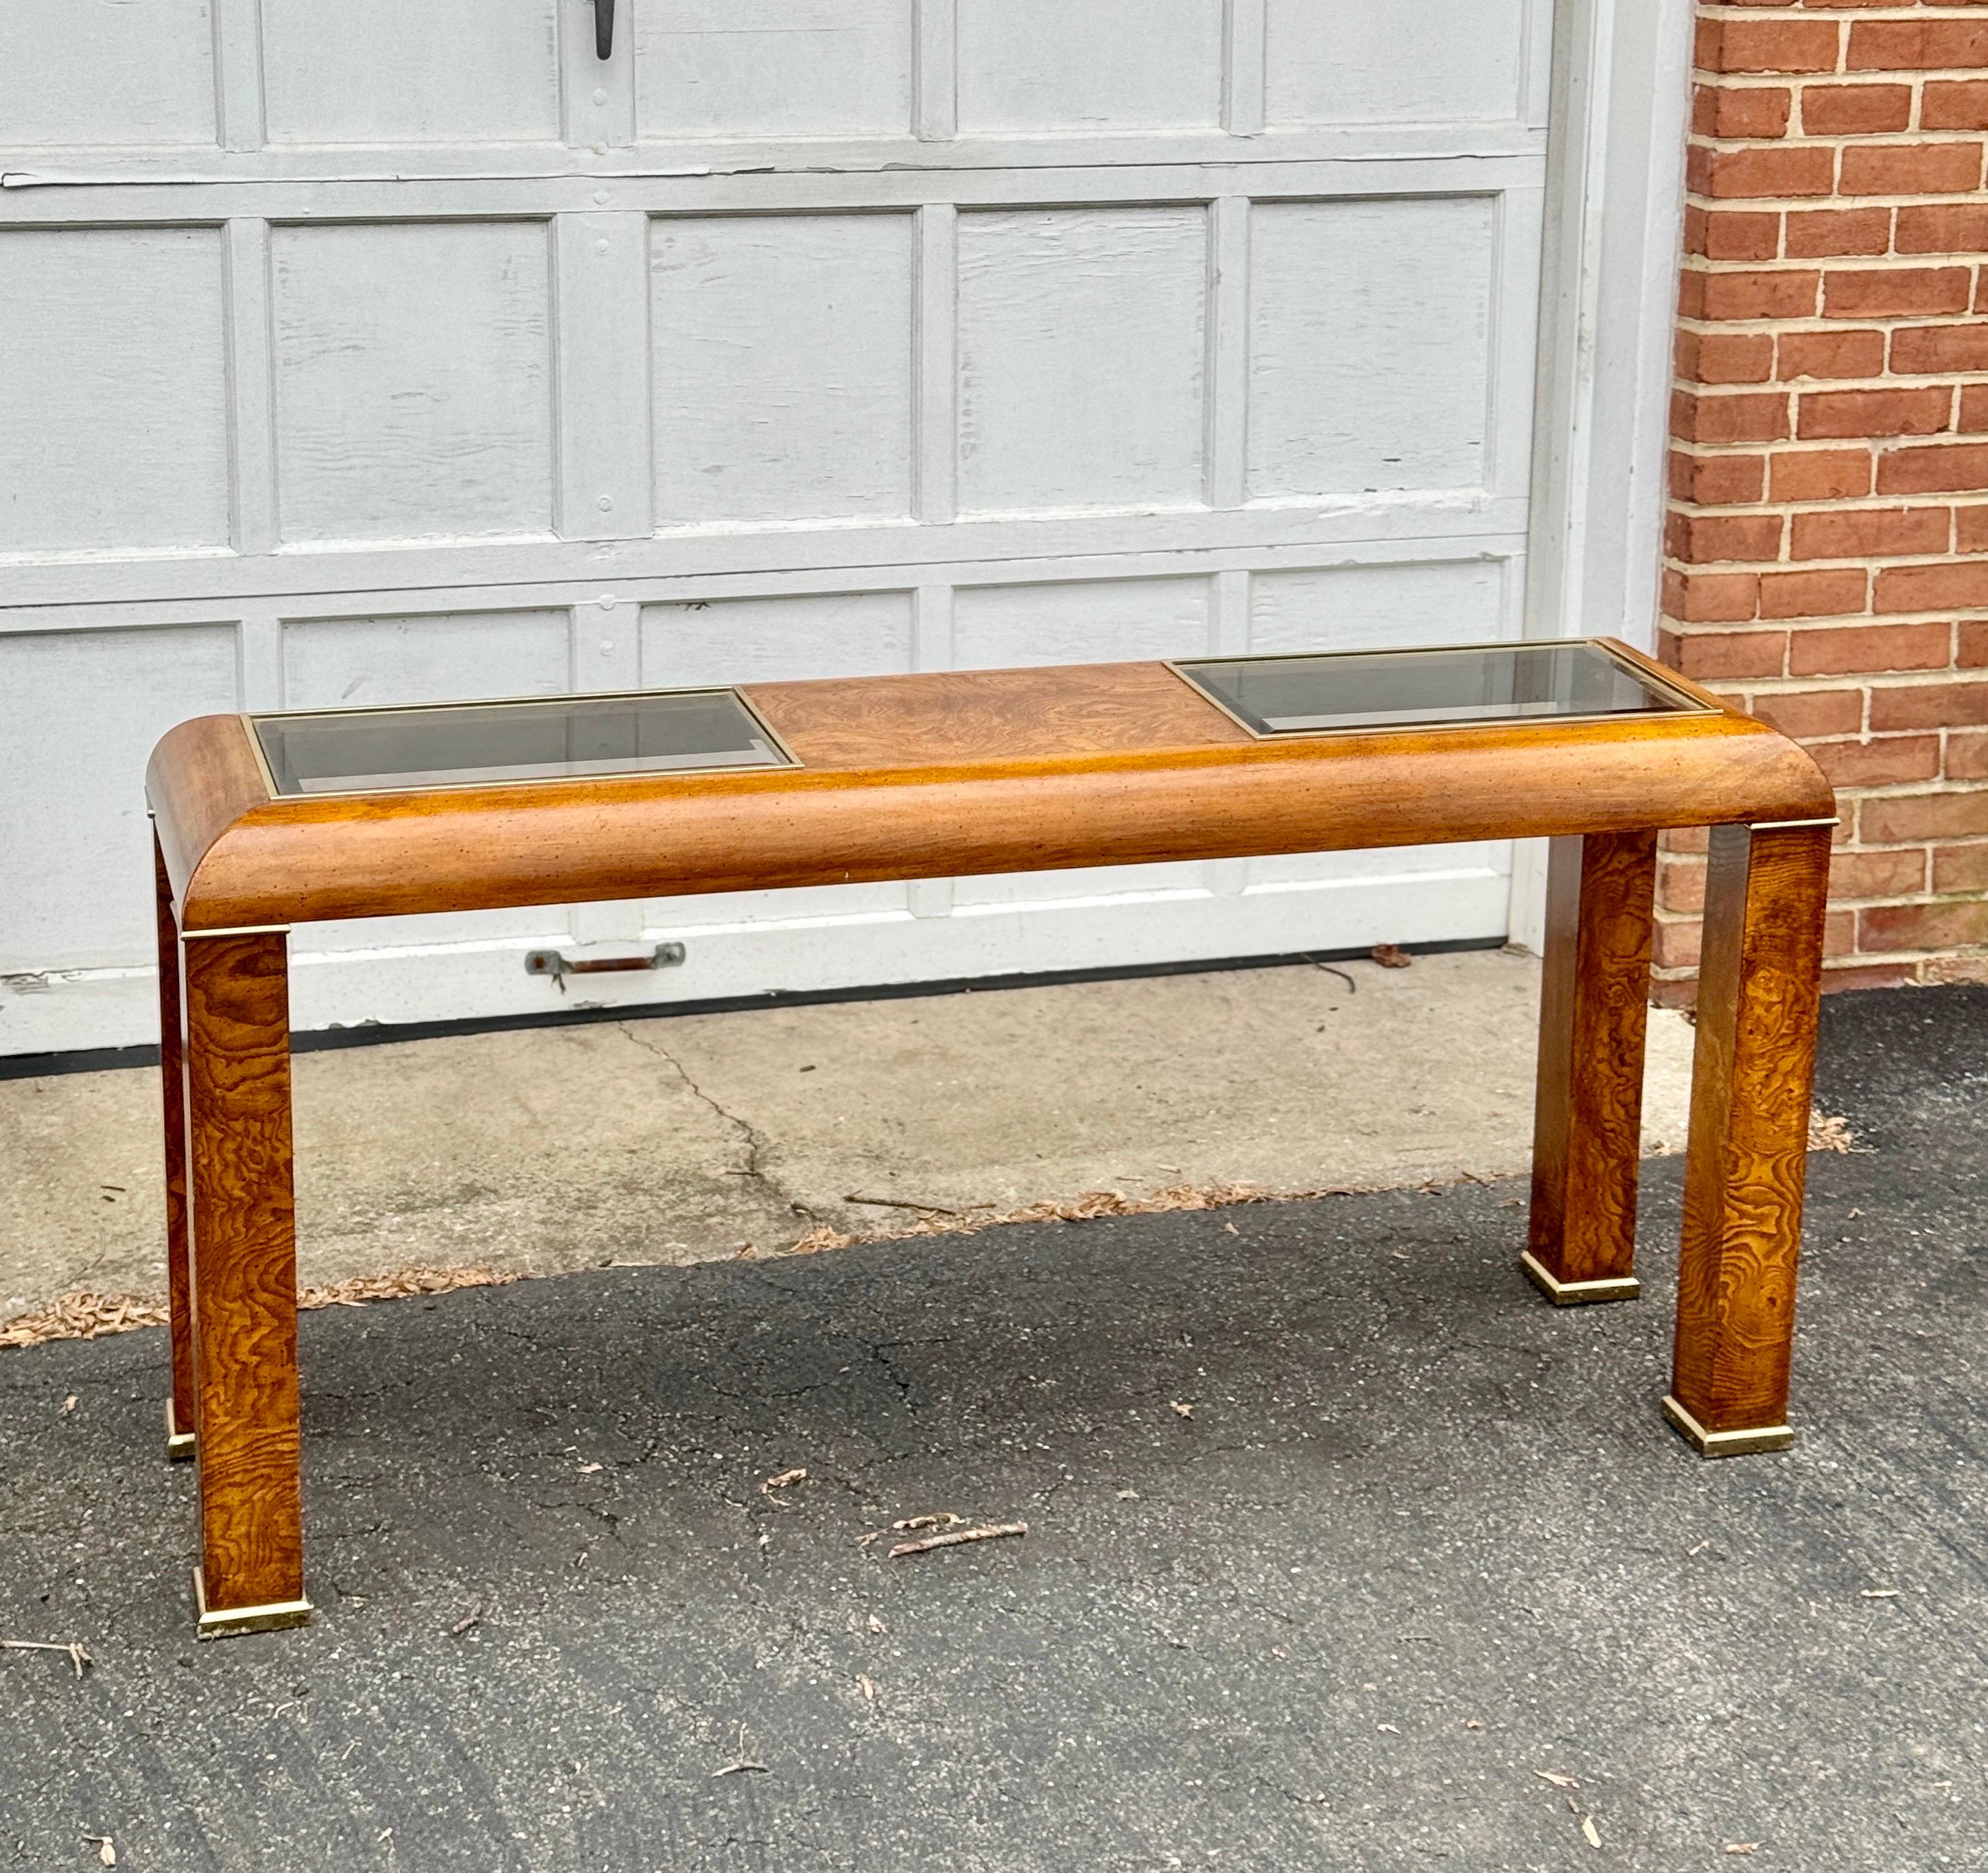 Console parsons table from the 1970s, showcasing a tasteful blend of burl wood and brass accents. Characterized by a low-profile silhouette with gently curved edges. The smoked glass tops, with beveled detailing, add a touch of refinement and can be